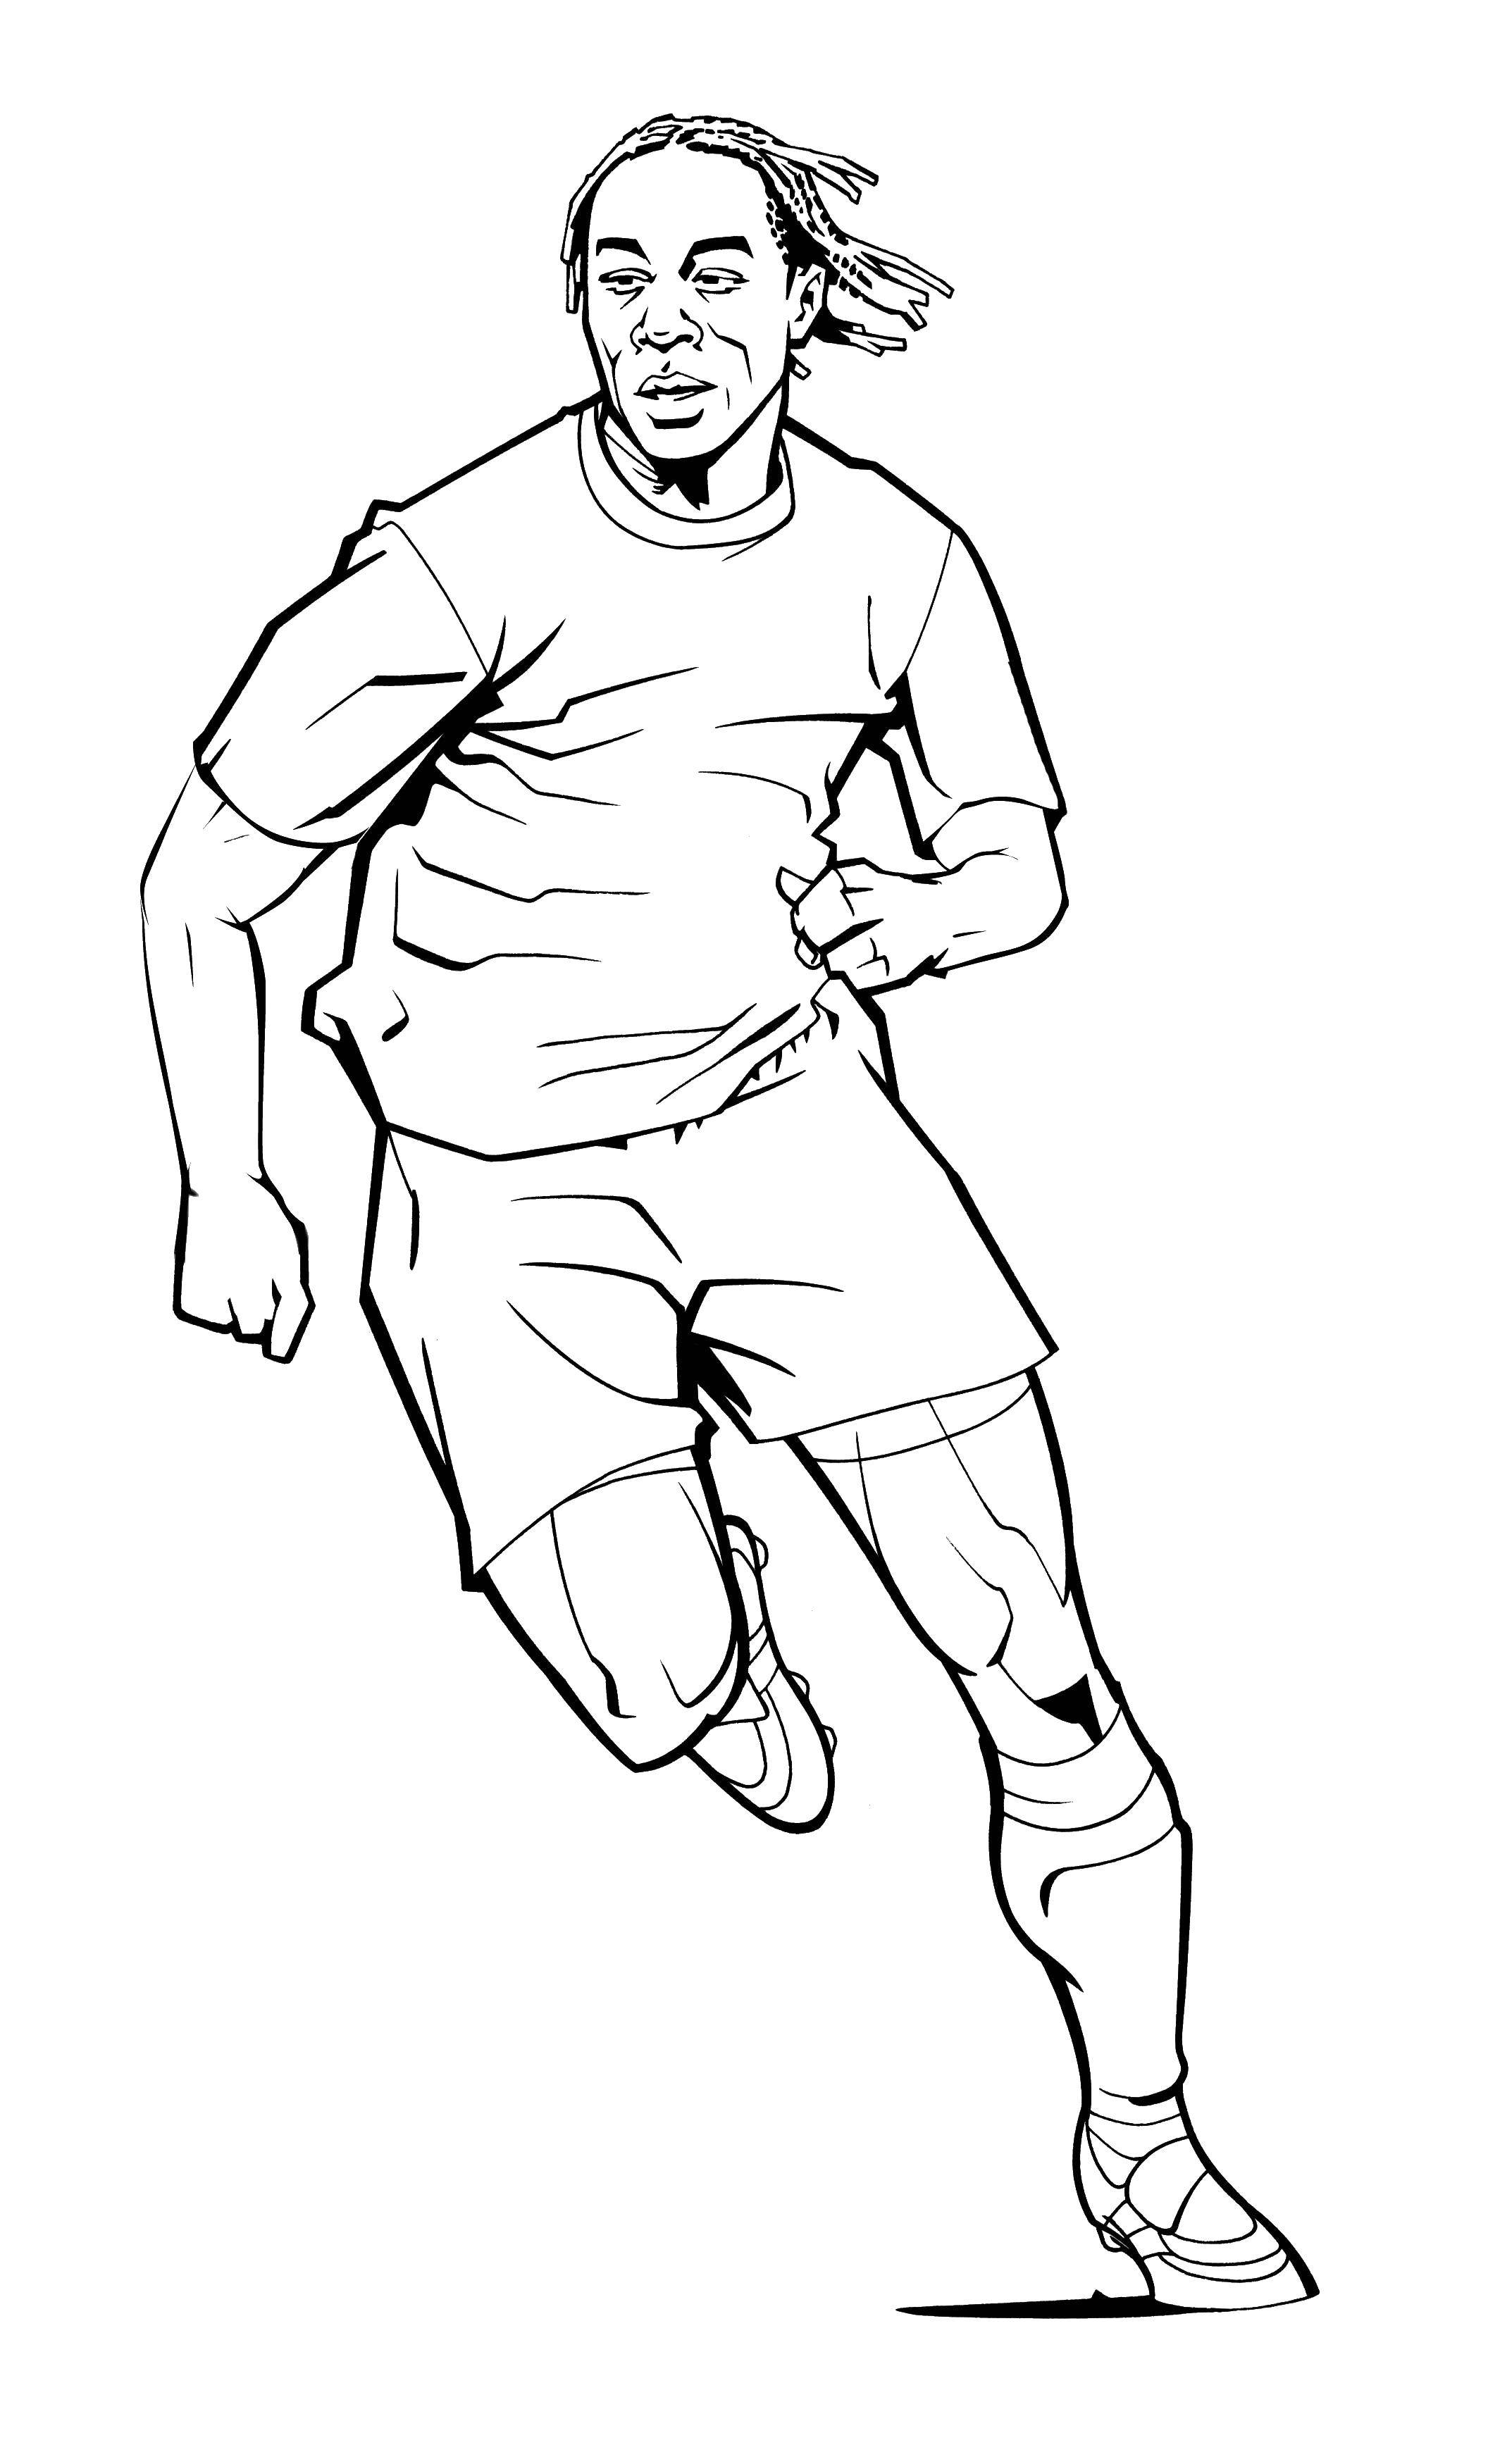 Coloring Player. Category sports. Tags:  football, football player.